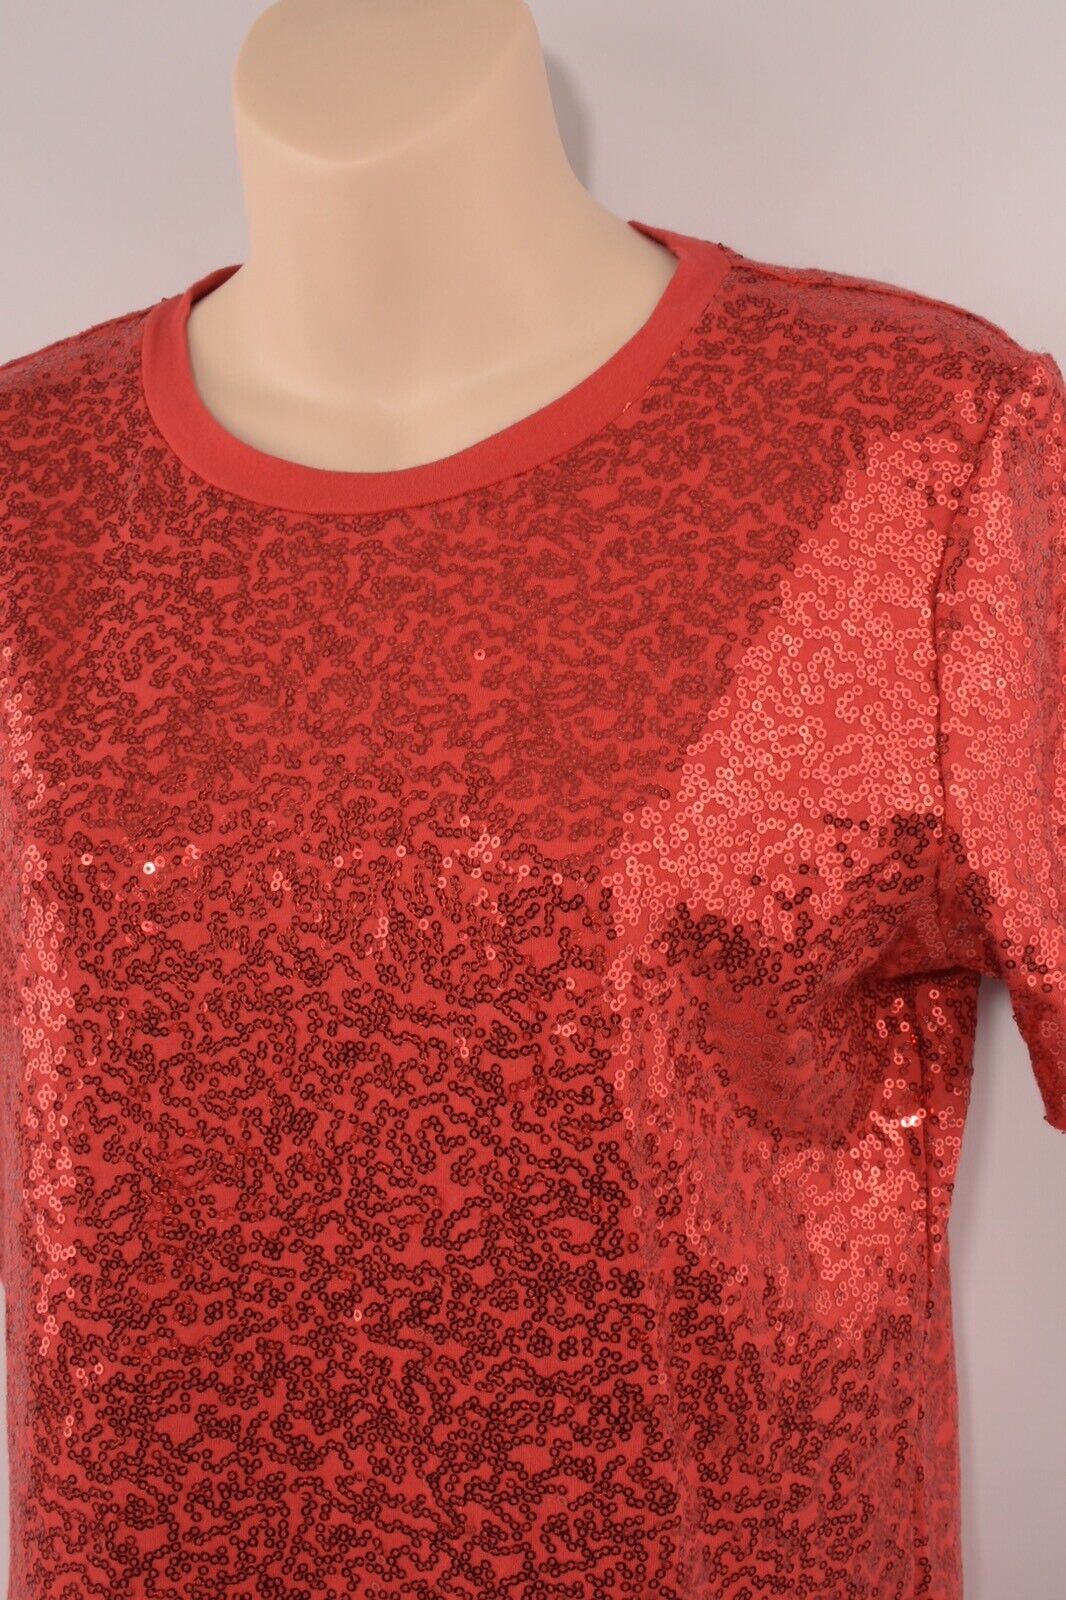 DKNY Women's Red Sequins T-shirt, size SMALL